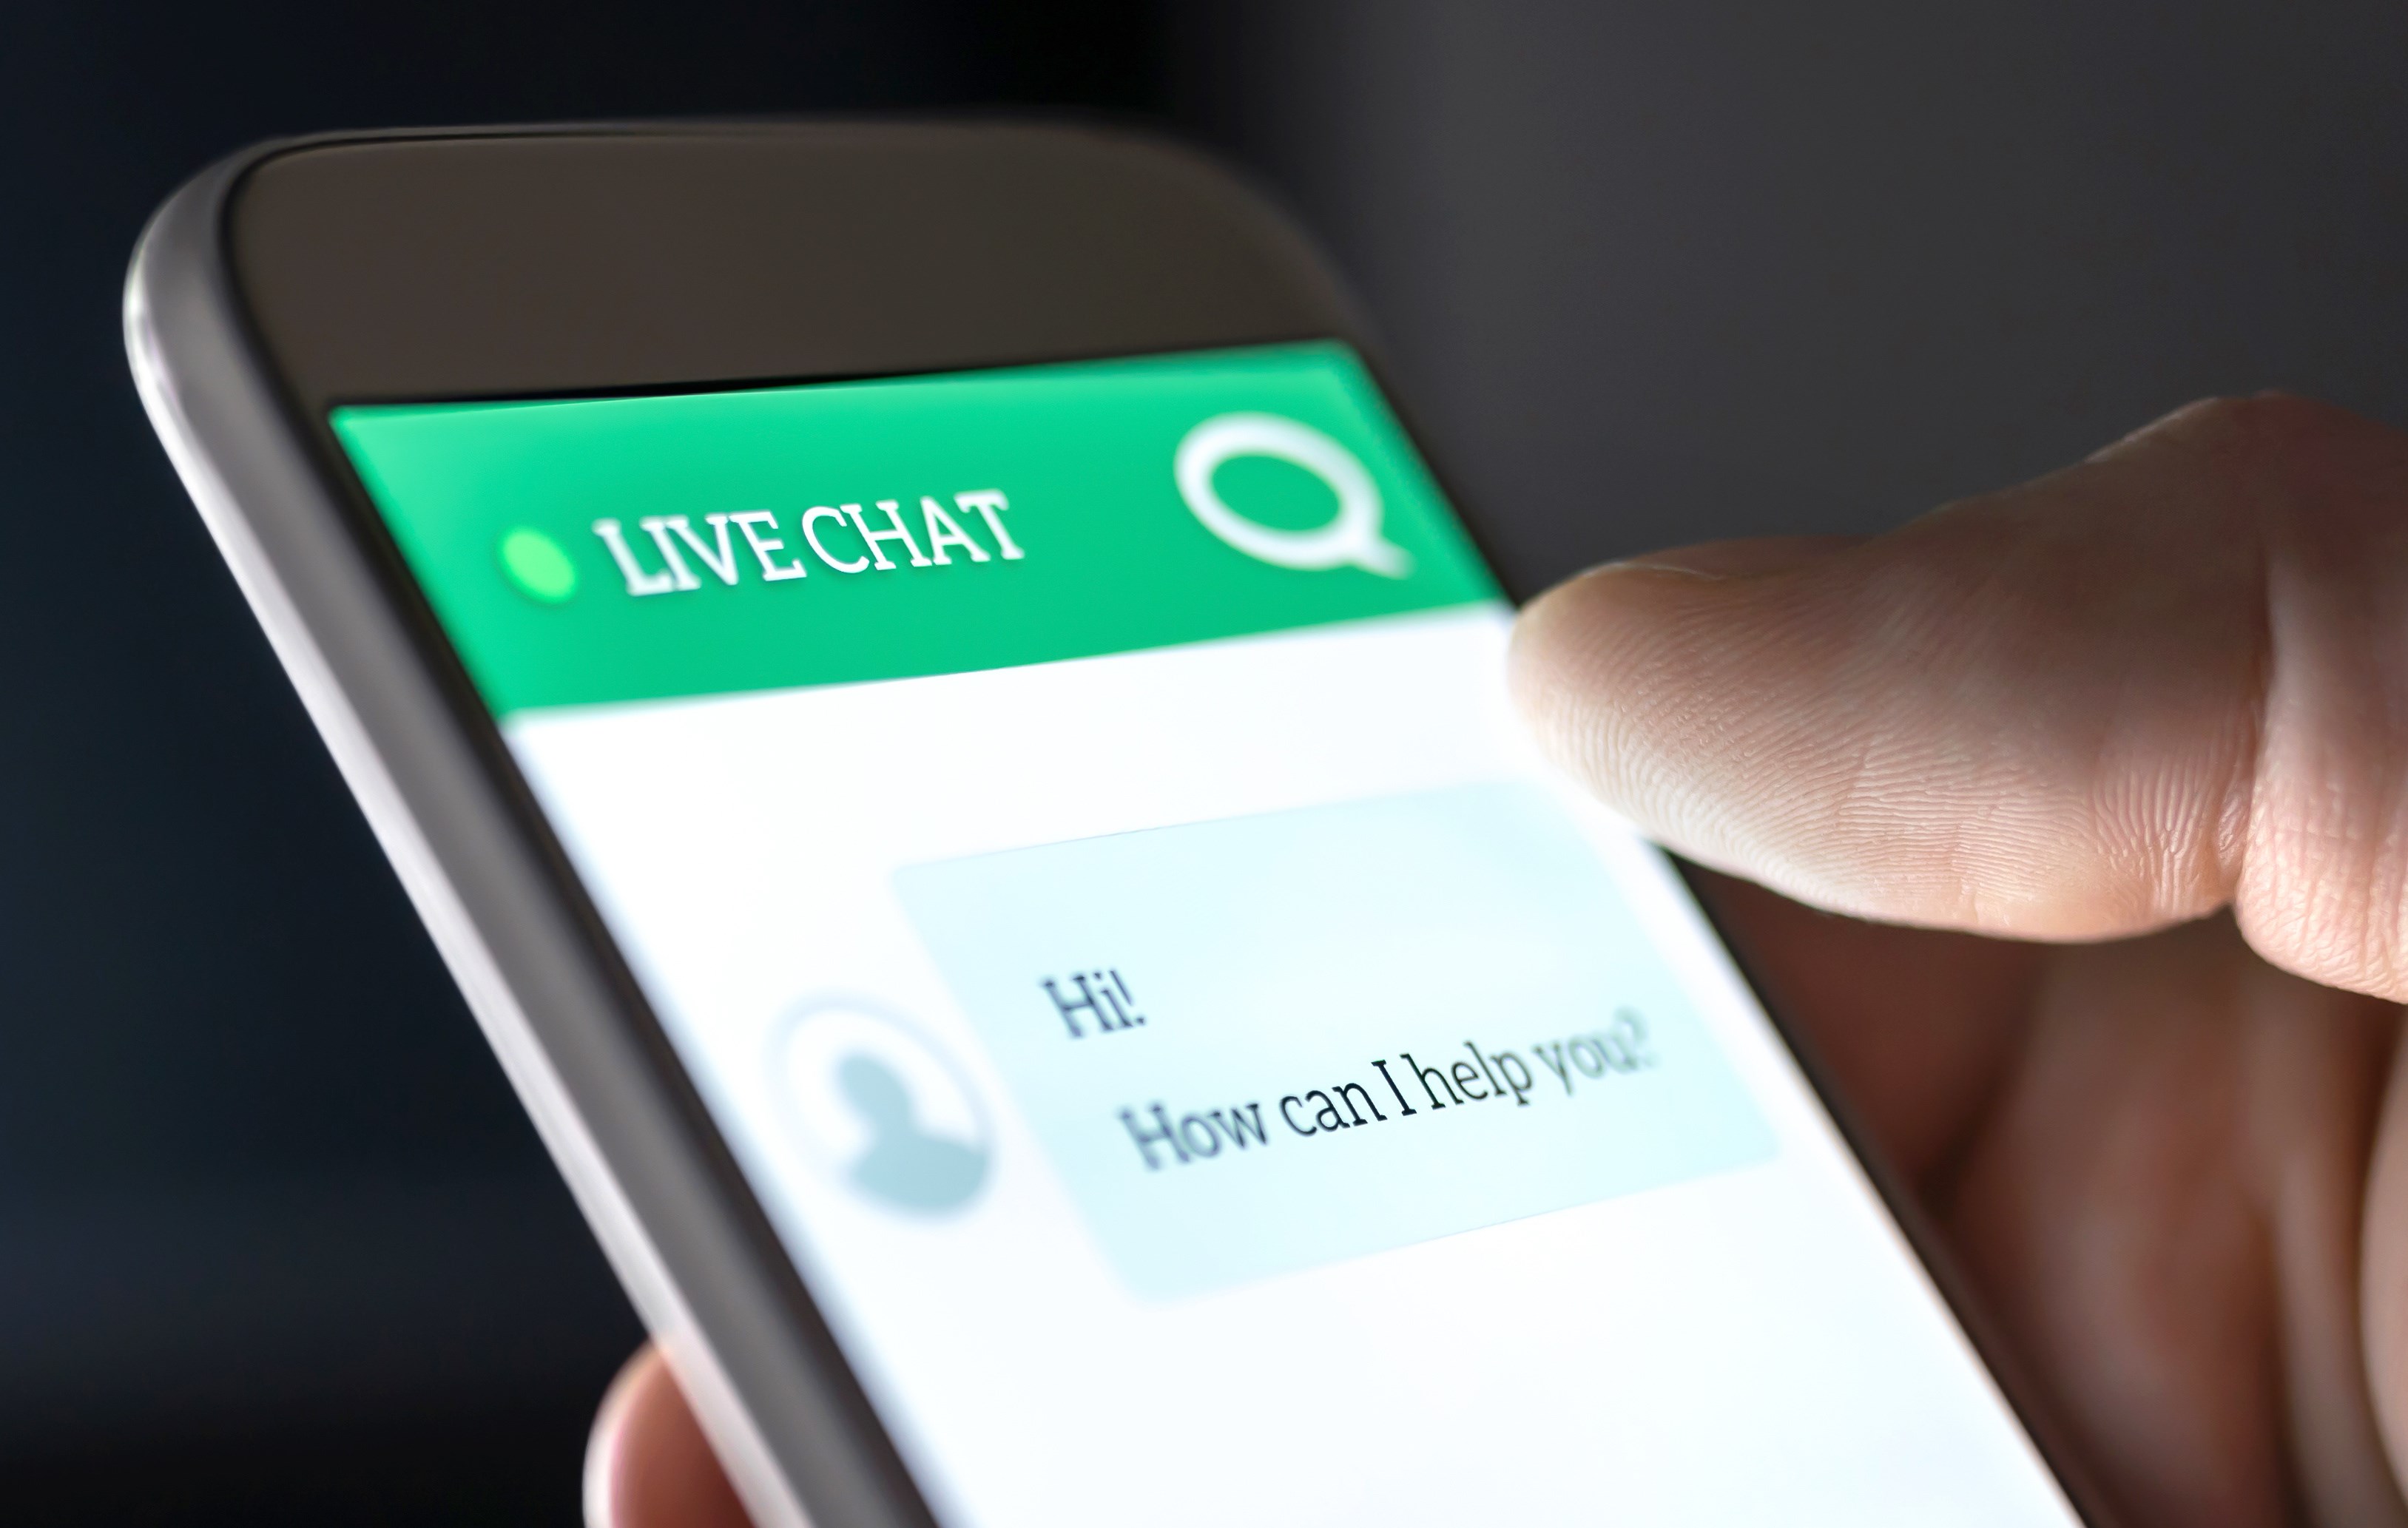 Phone screen with live chat displayed